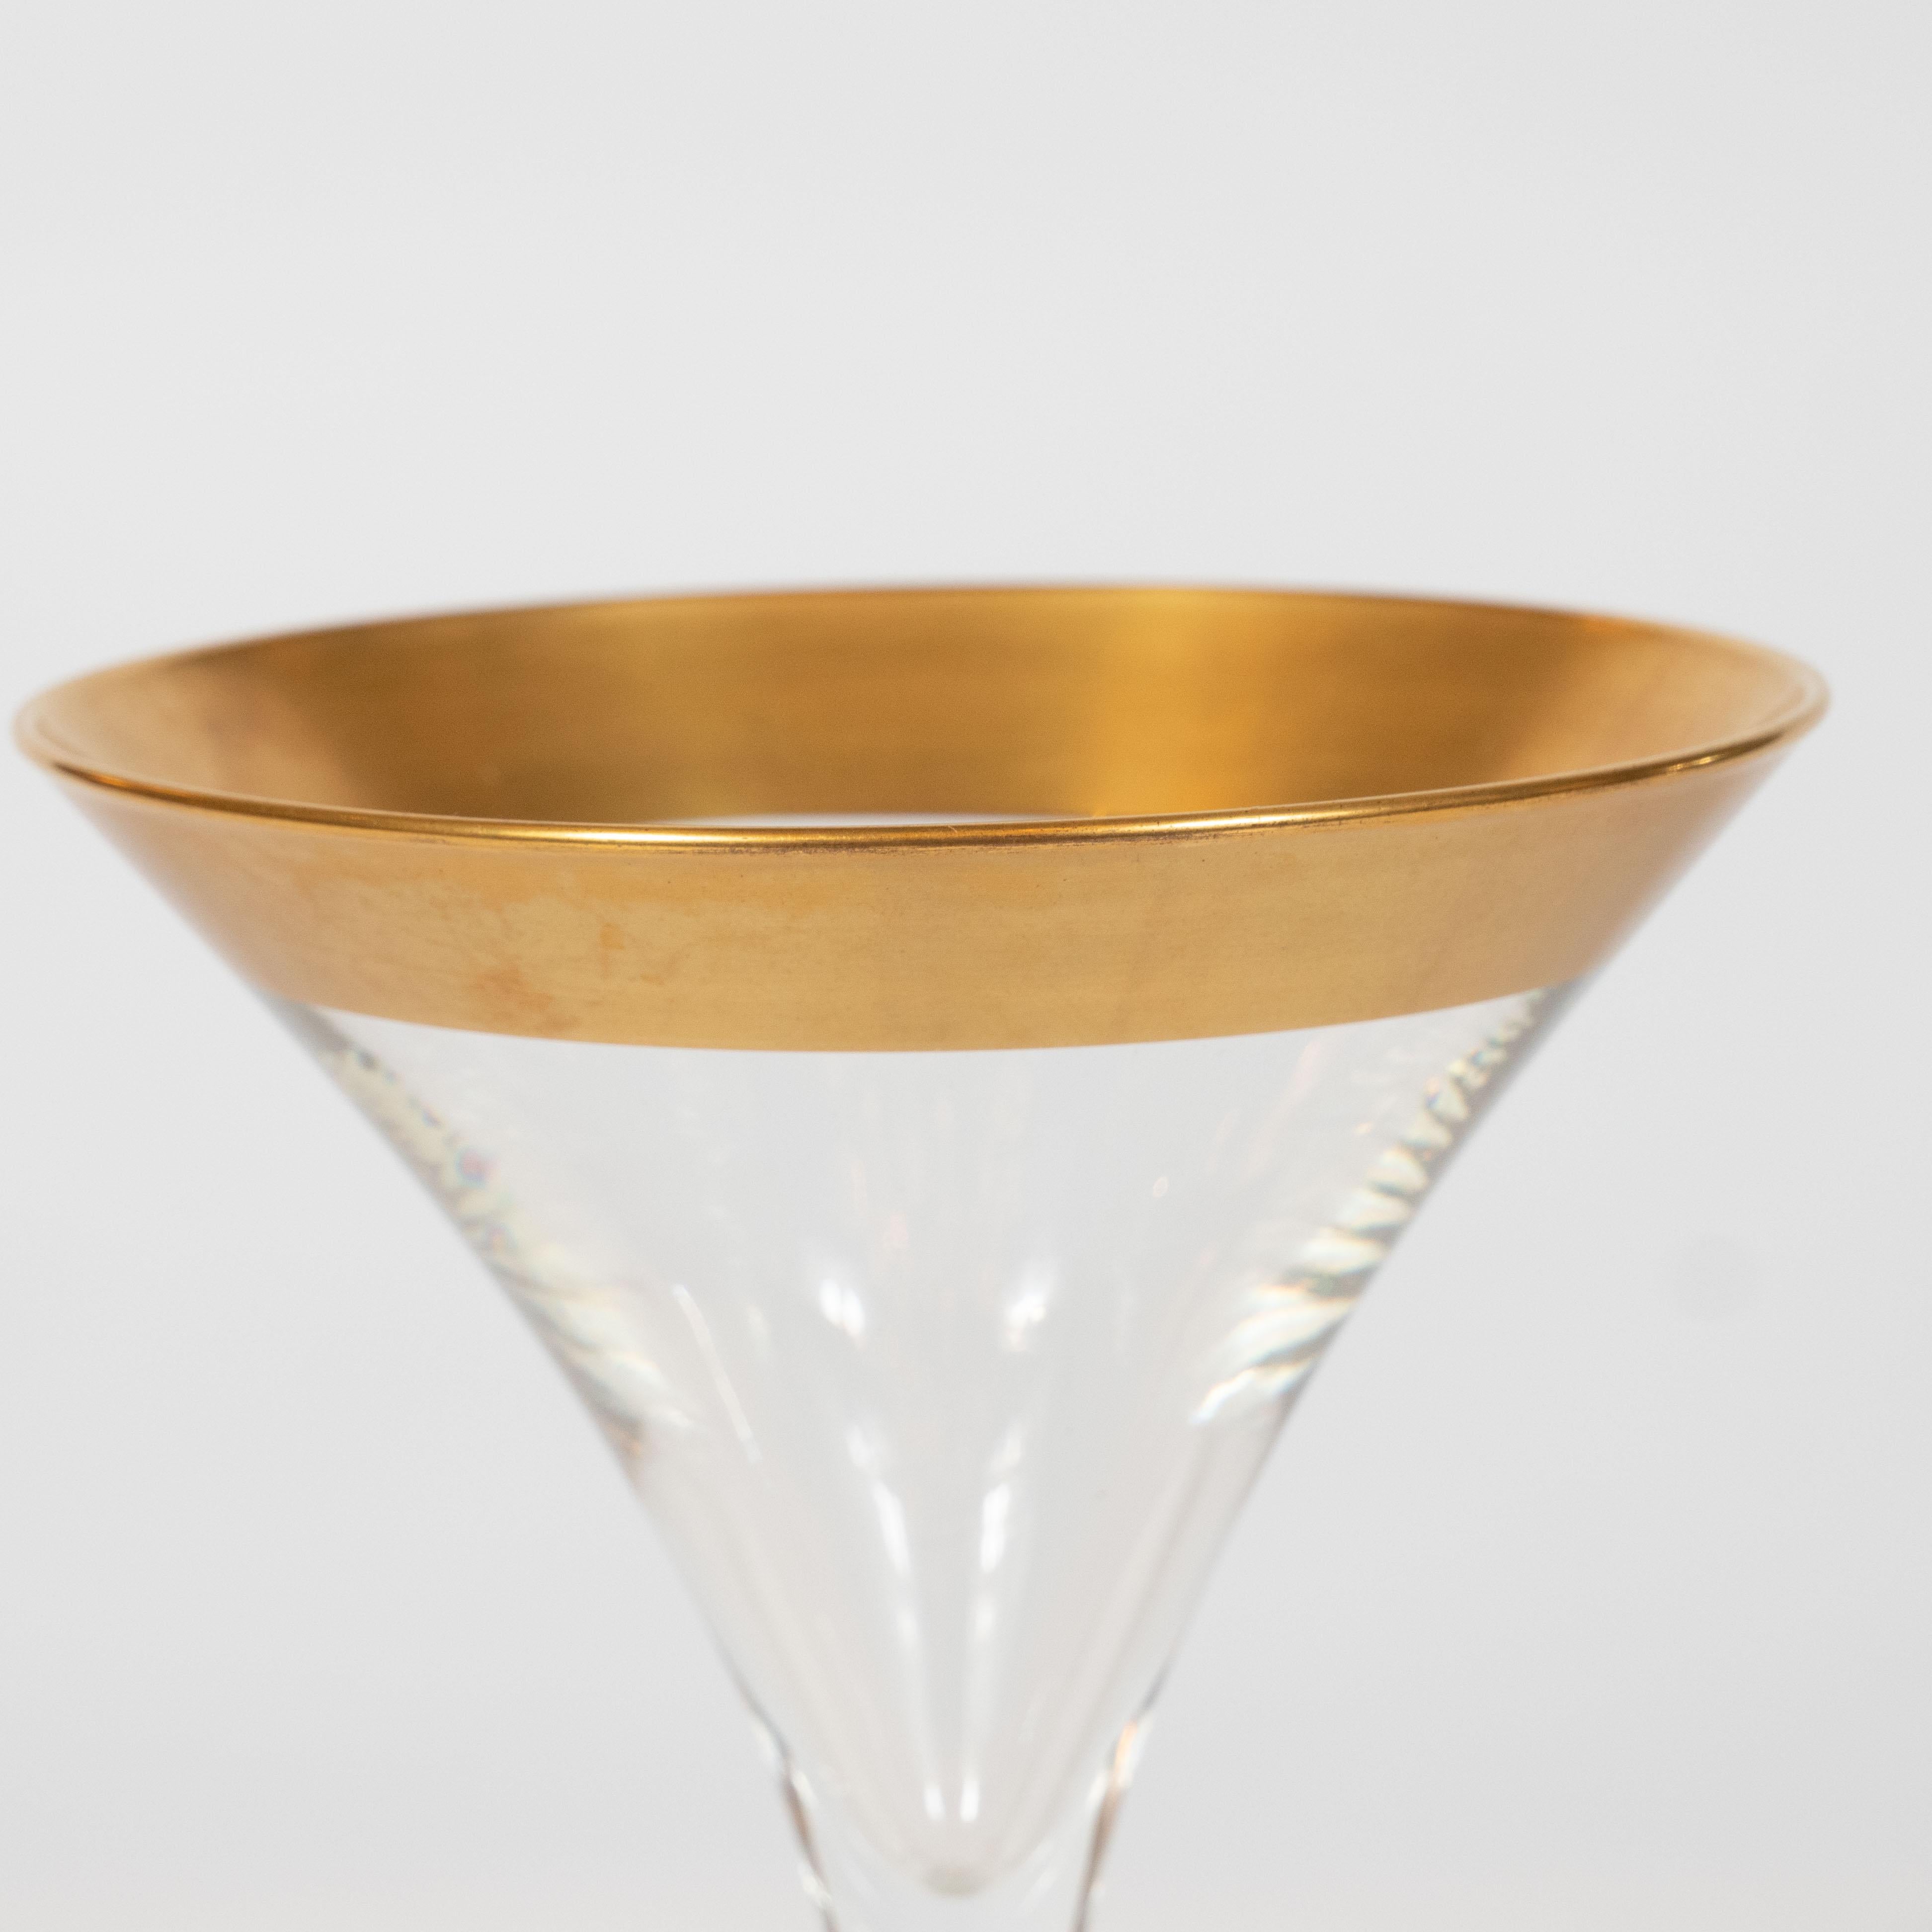 North American Set of Four Midcentury Gold Rimmed Champagne/ Martini Glasses by Dorothy Thorpe